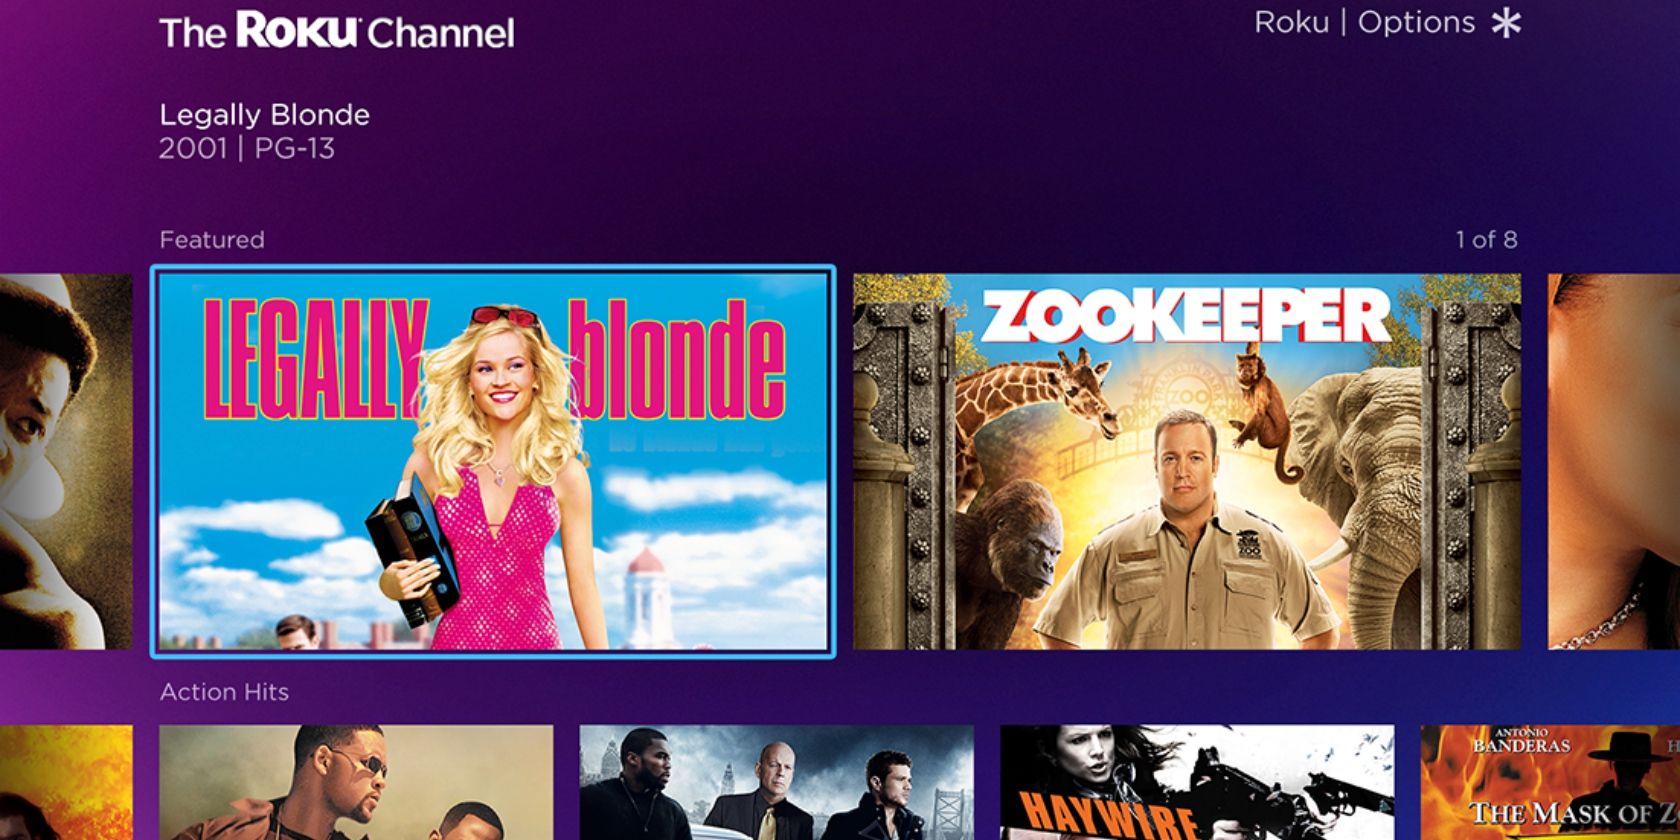 The Roku Channel Lets You Watch Movies for Free